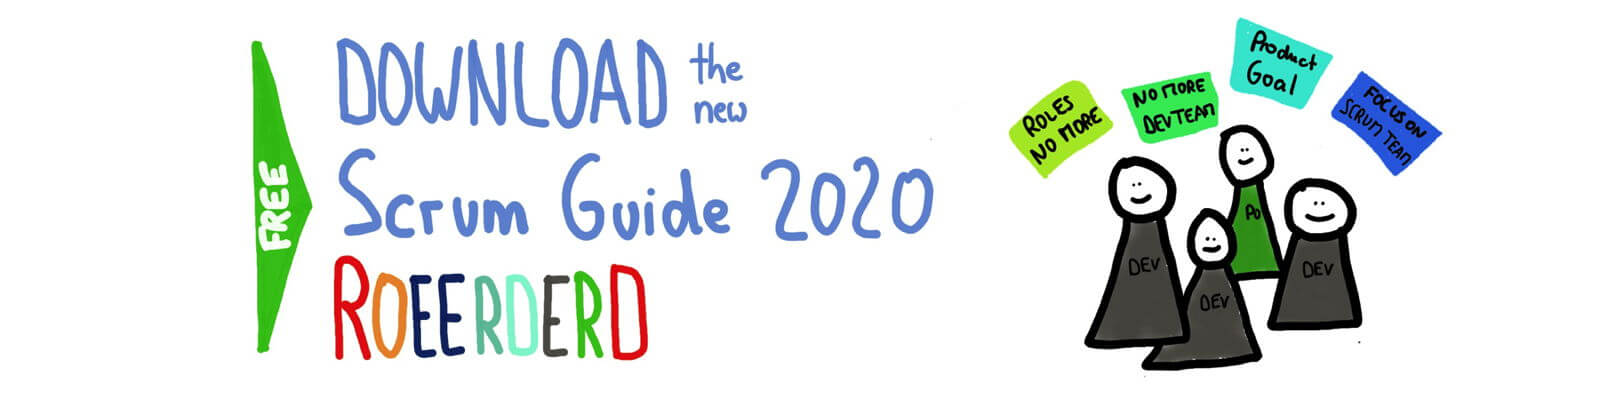 Scrum Guide 2020 — Download the new edition of the Scrum Guide Reordered to prepare for the Scrum Master interview — Age-of-Product.com